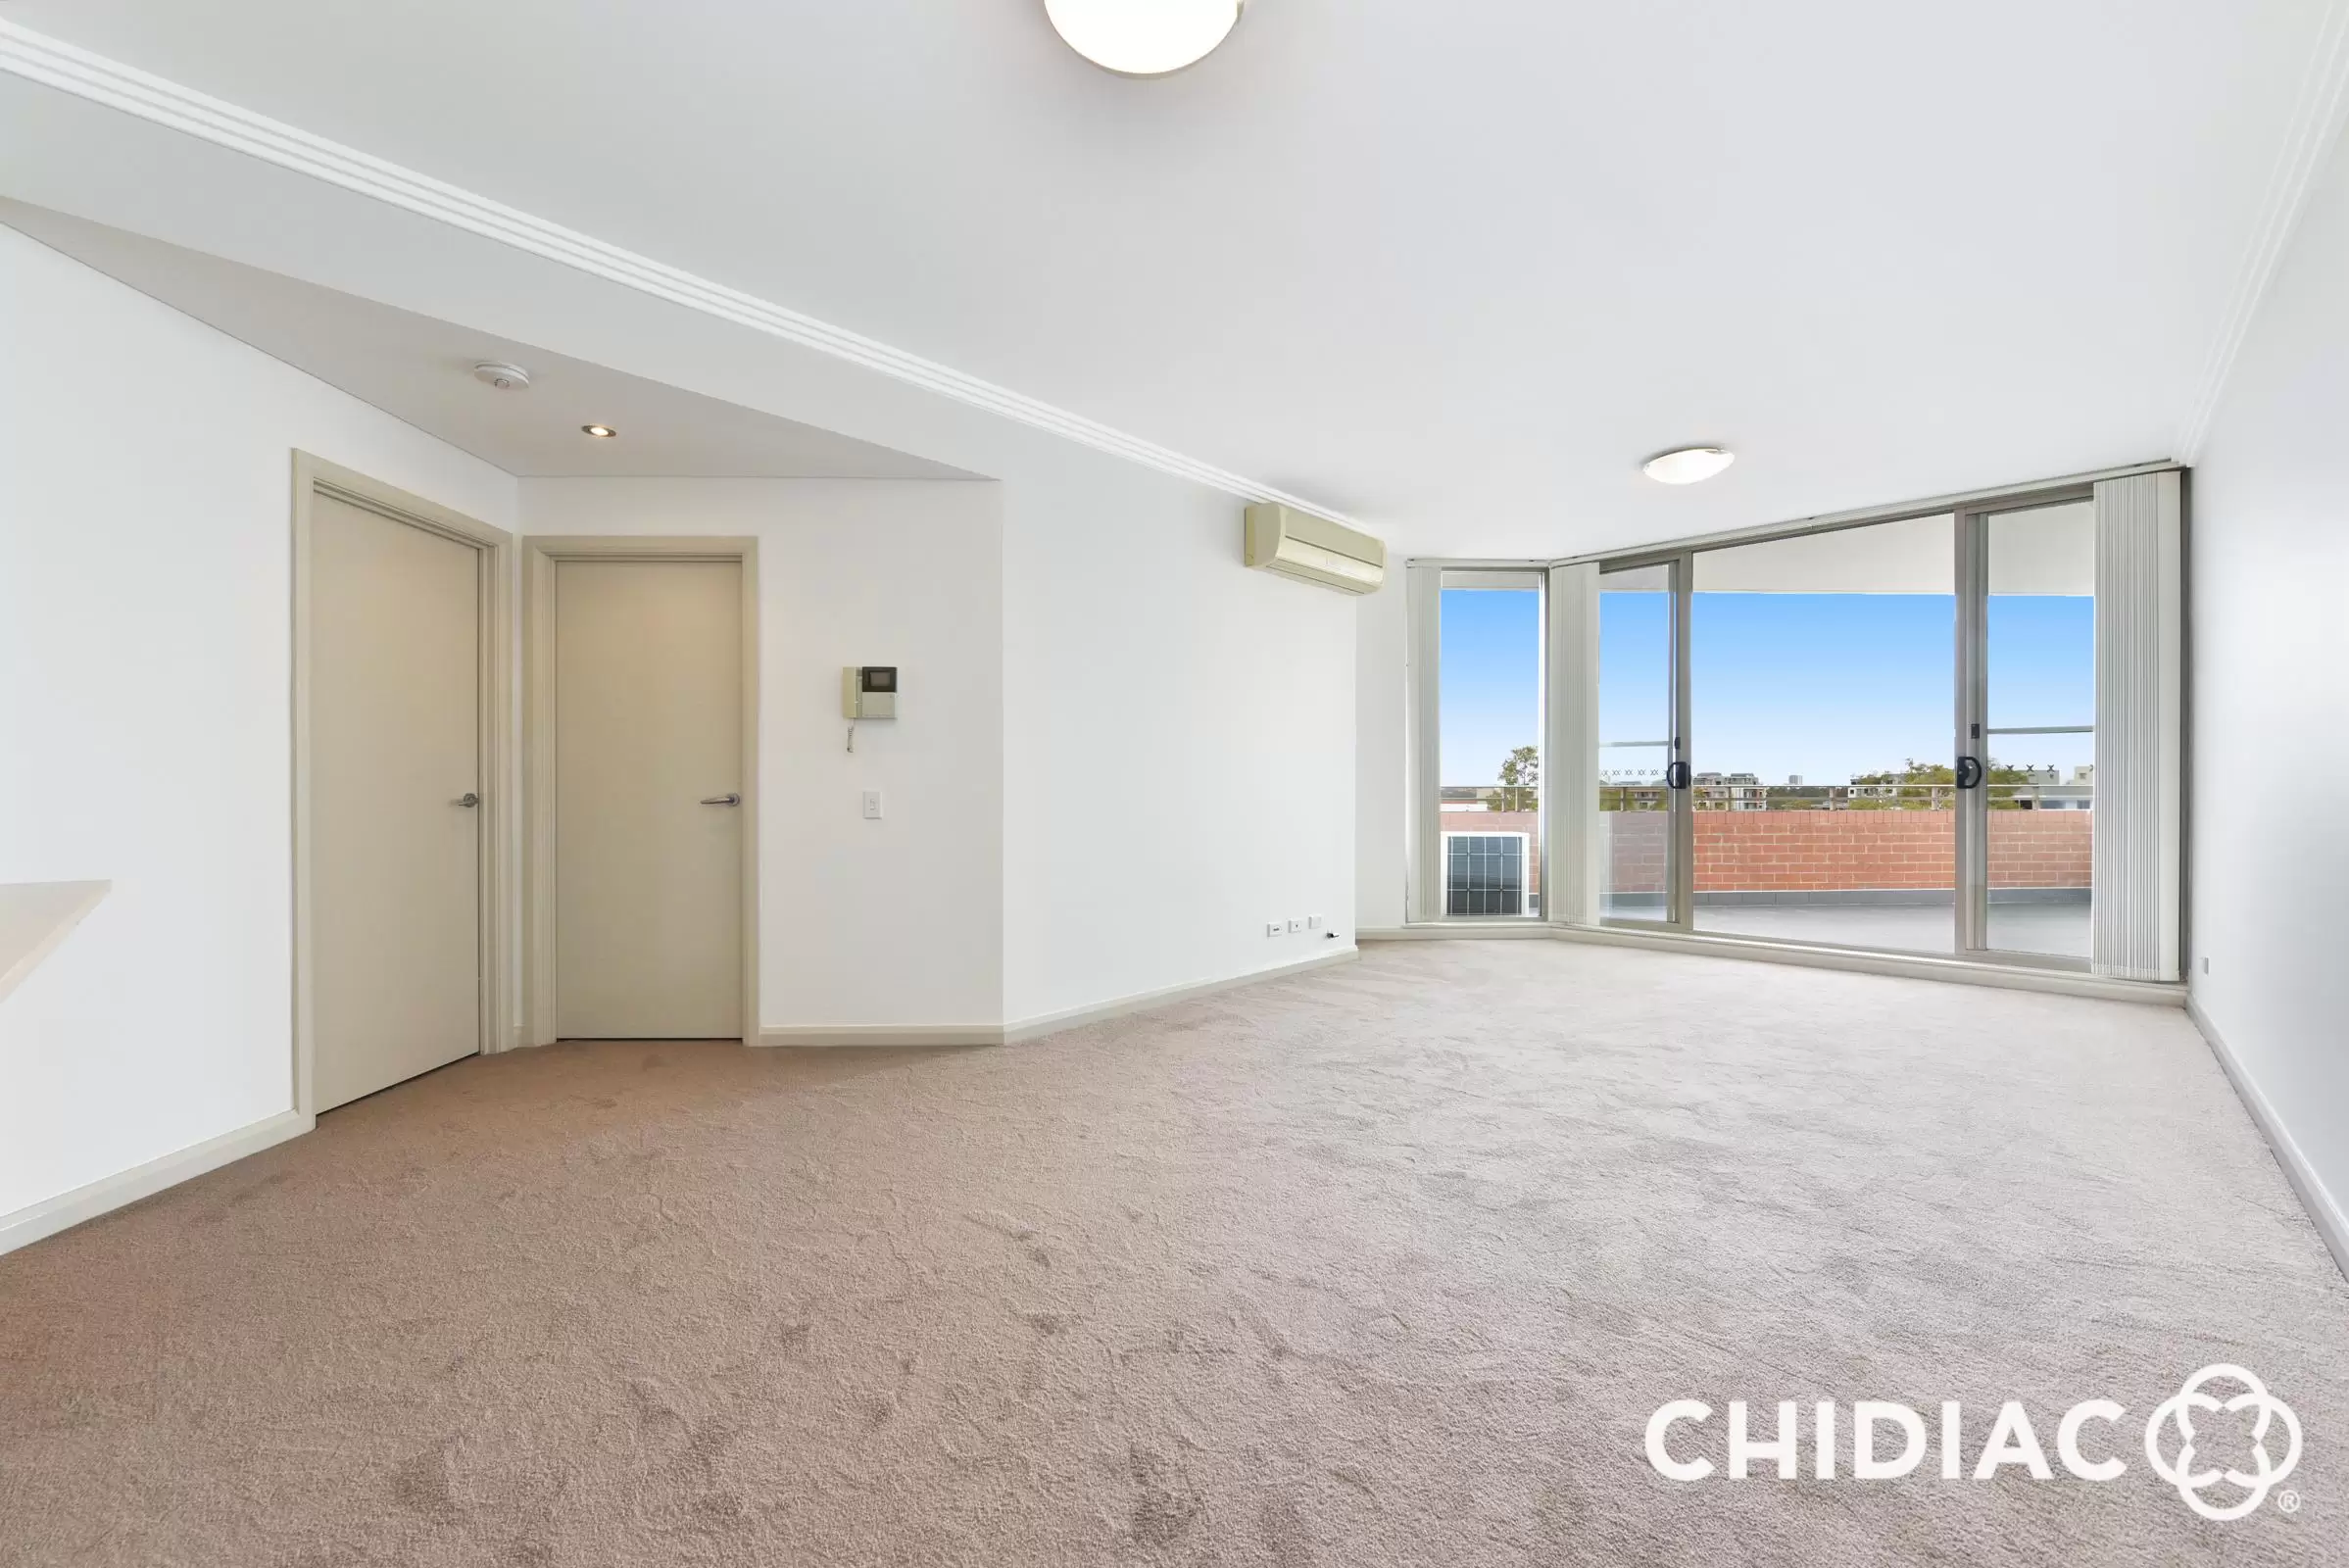 704/1 Stromboli Strait, Wentworth Point Leased by Chidiac Realty - image 1